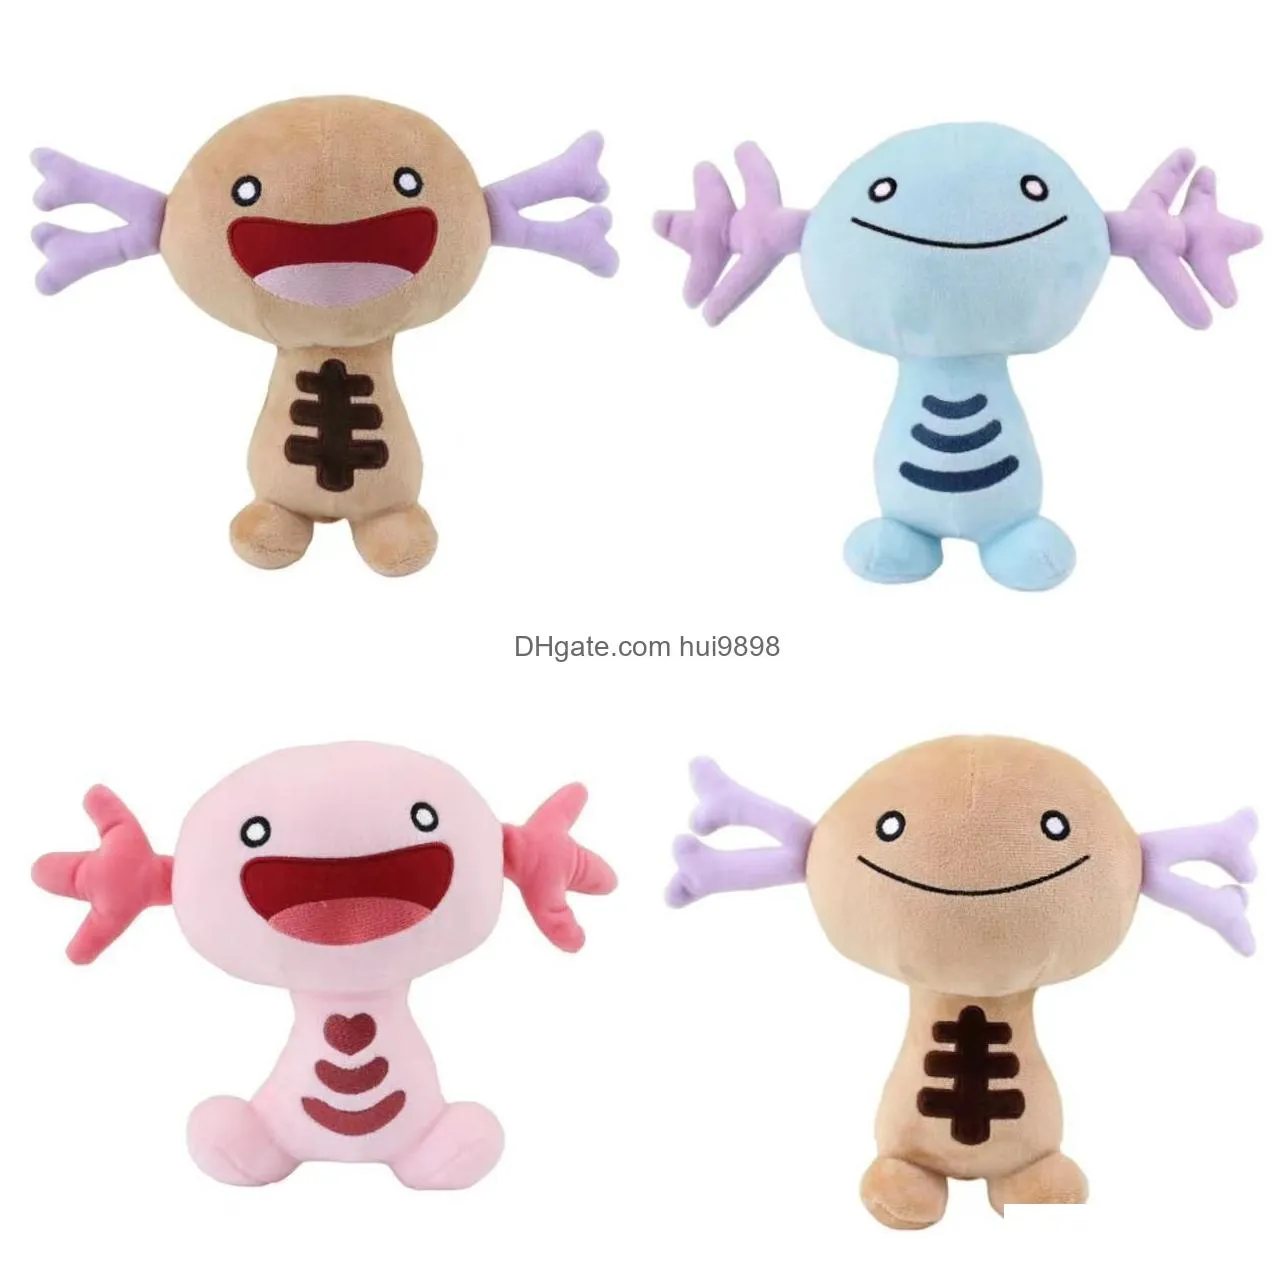  selling cartoon cute plush doll toys anime games peripheral plush doll childrens gifts wholesale ups